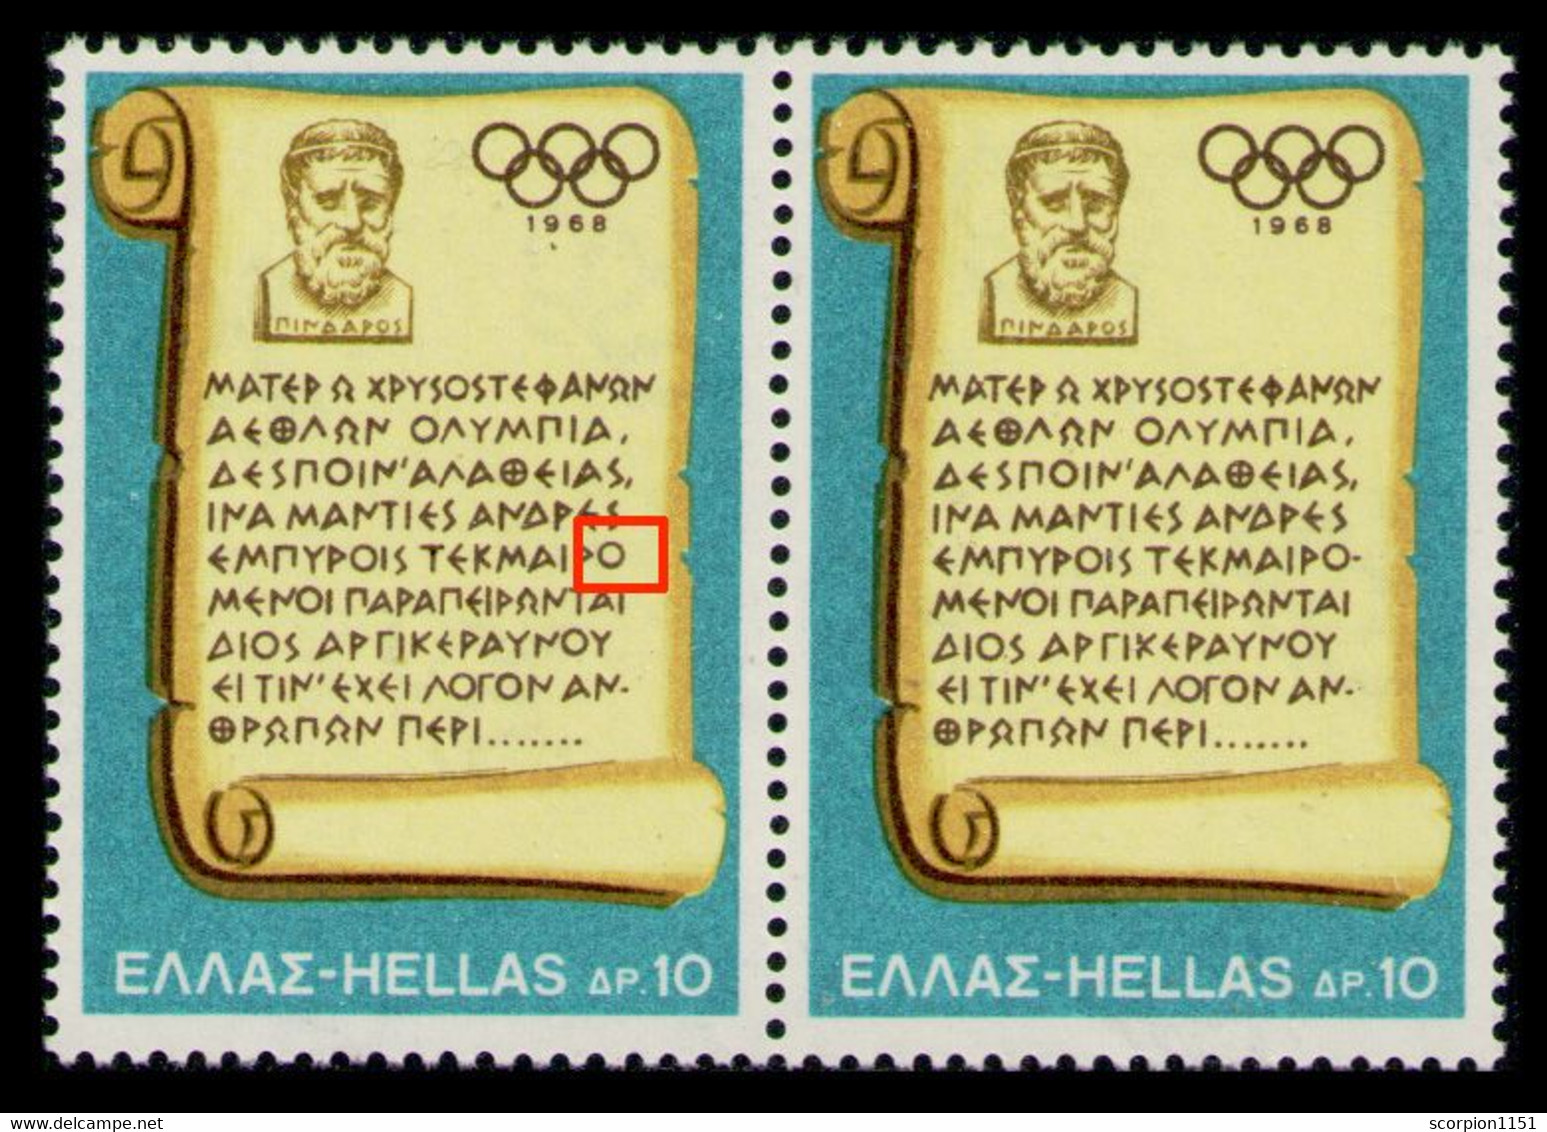 GREECE 1968 - ERROR No Dash After "O" At The Left Stamp RR In Pair - MNH** - Nuevos